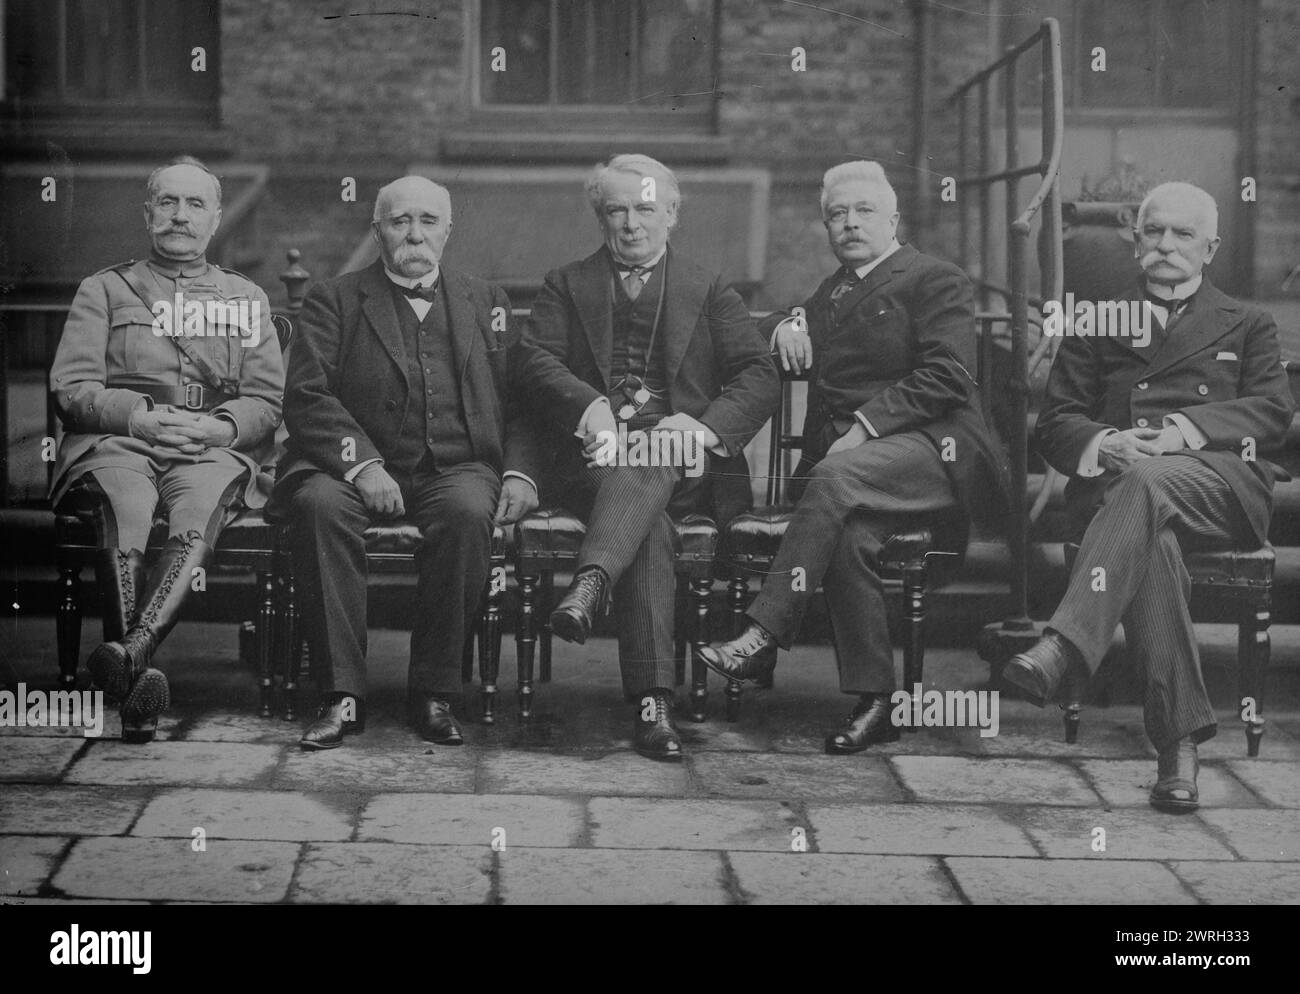 Foch, Clemenceau, Lloyd George, Orlando, Sonnino, between c1915 and c1920. Shows French General Ferdinand Foch (1851-1929), French Prime Minister Georges Benjamin Clemenceau (1841-1929), British Prime Minister David Lloyd George (1863-1945), Italian Prime Minister Vittorio Emanuele Orlando (1860-1952) and Italian Minister of Foreign Affairs Baron Sidney Costantino Sonnino (1847-1922). Stock Photo